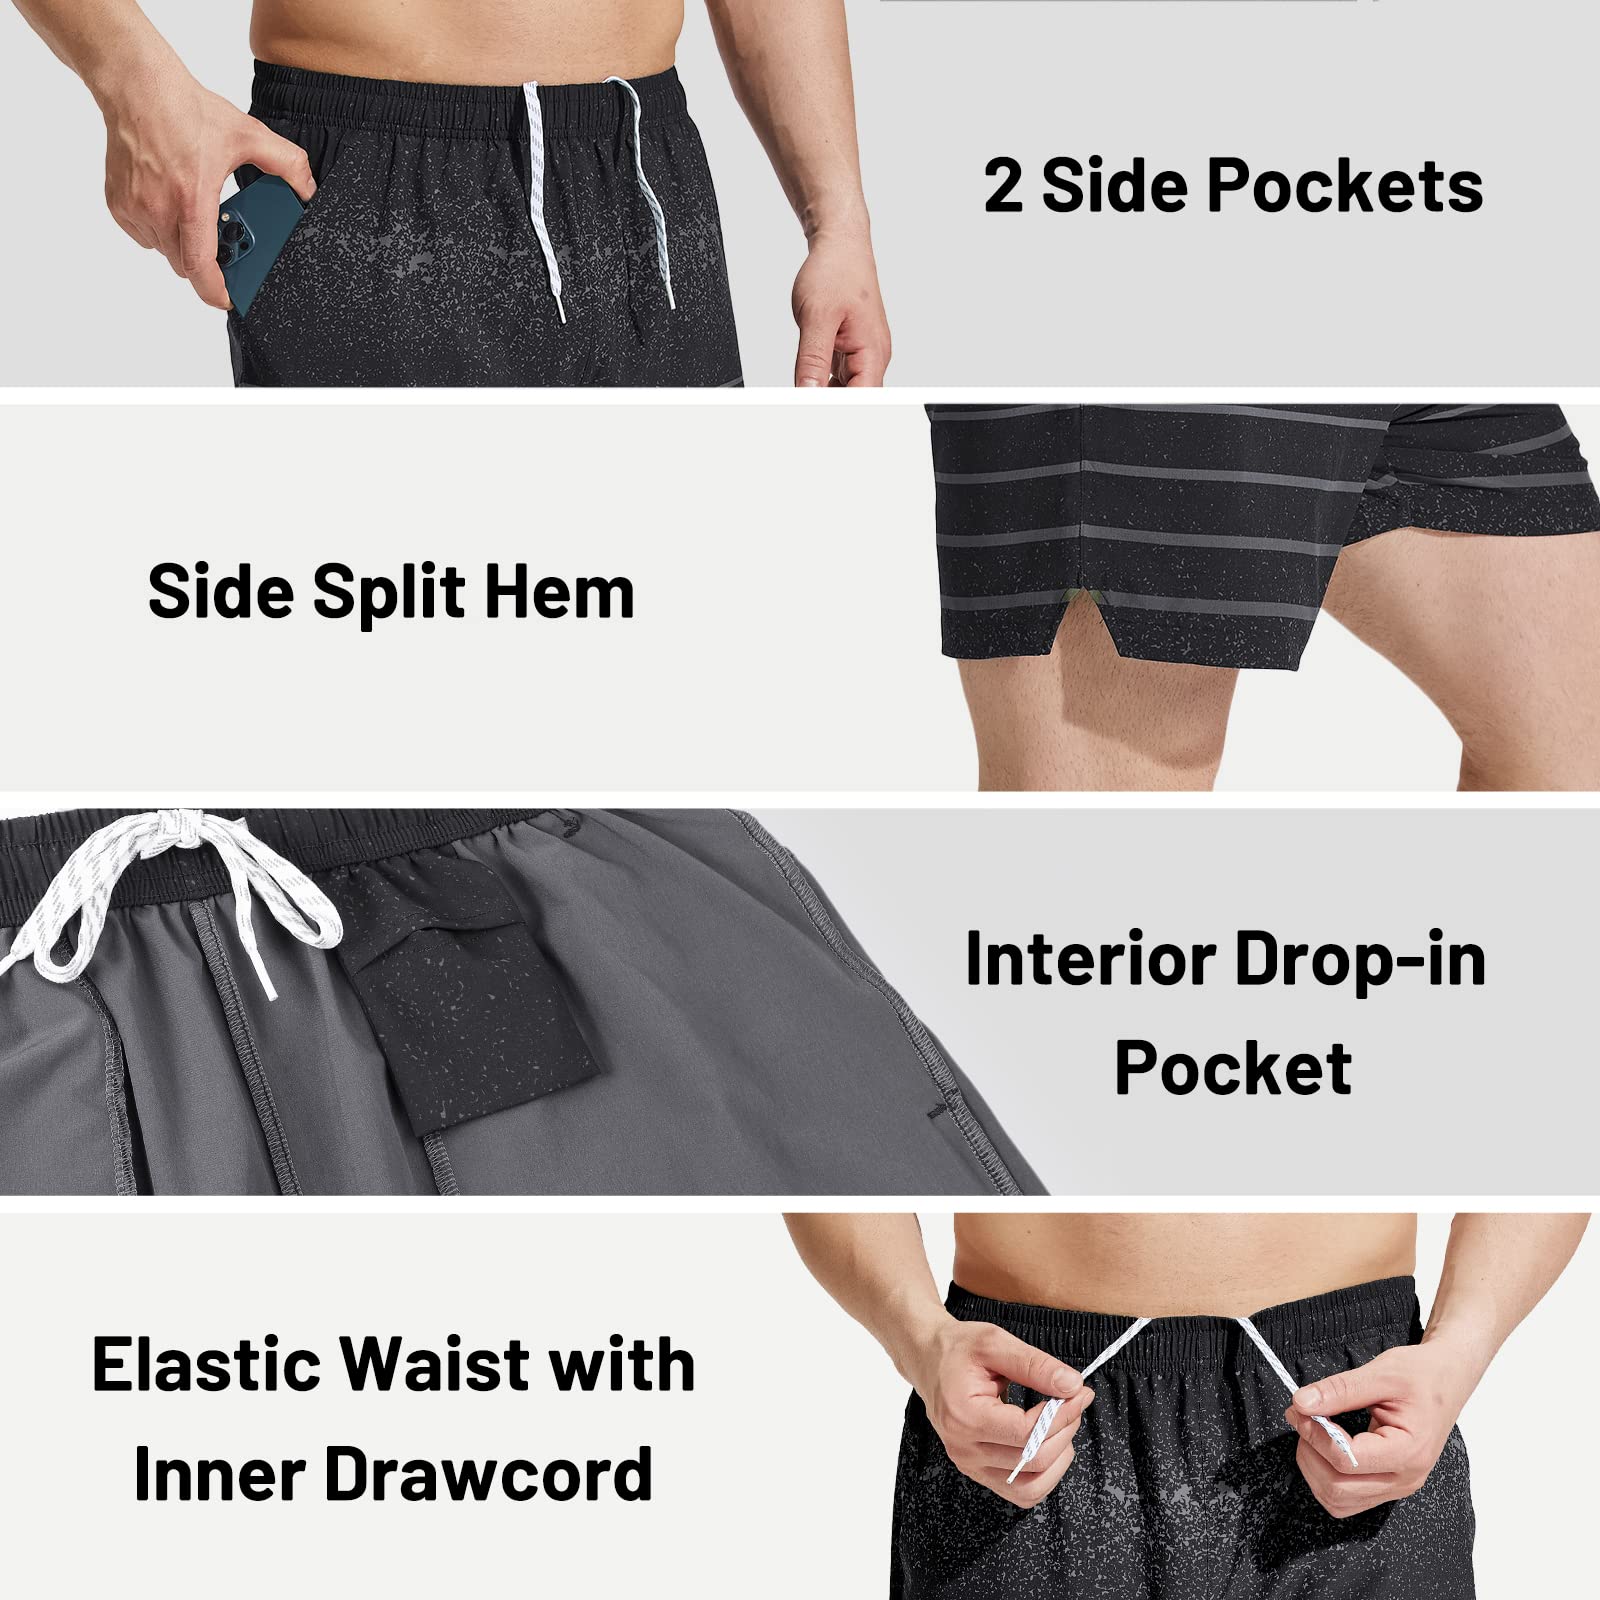 Men Workout Running Shorts Lightweight 5 Inches Shorts with Pockets Men's Shorts MIER